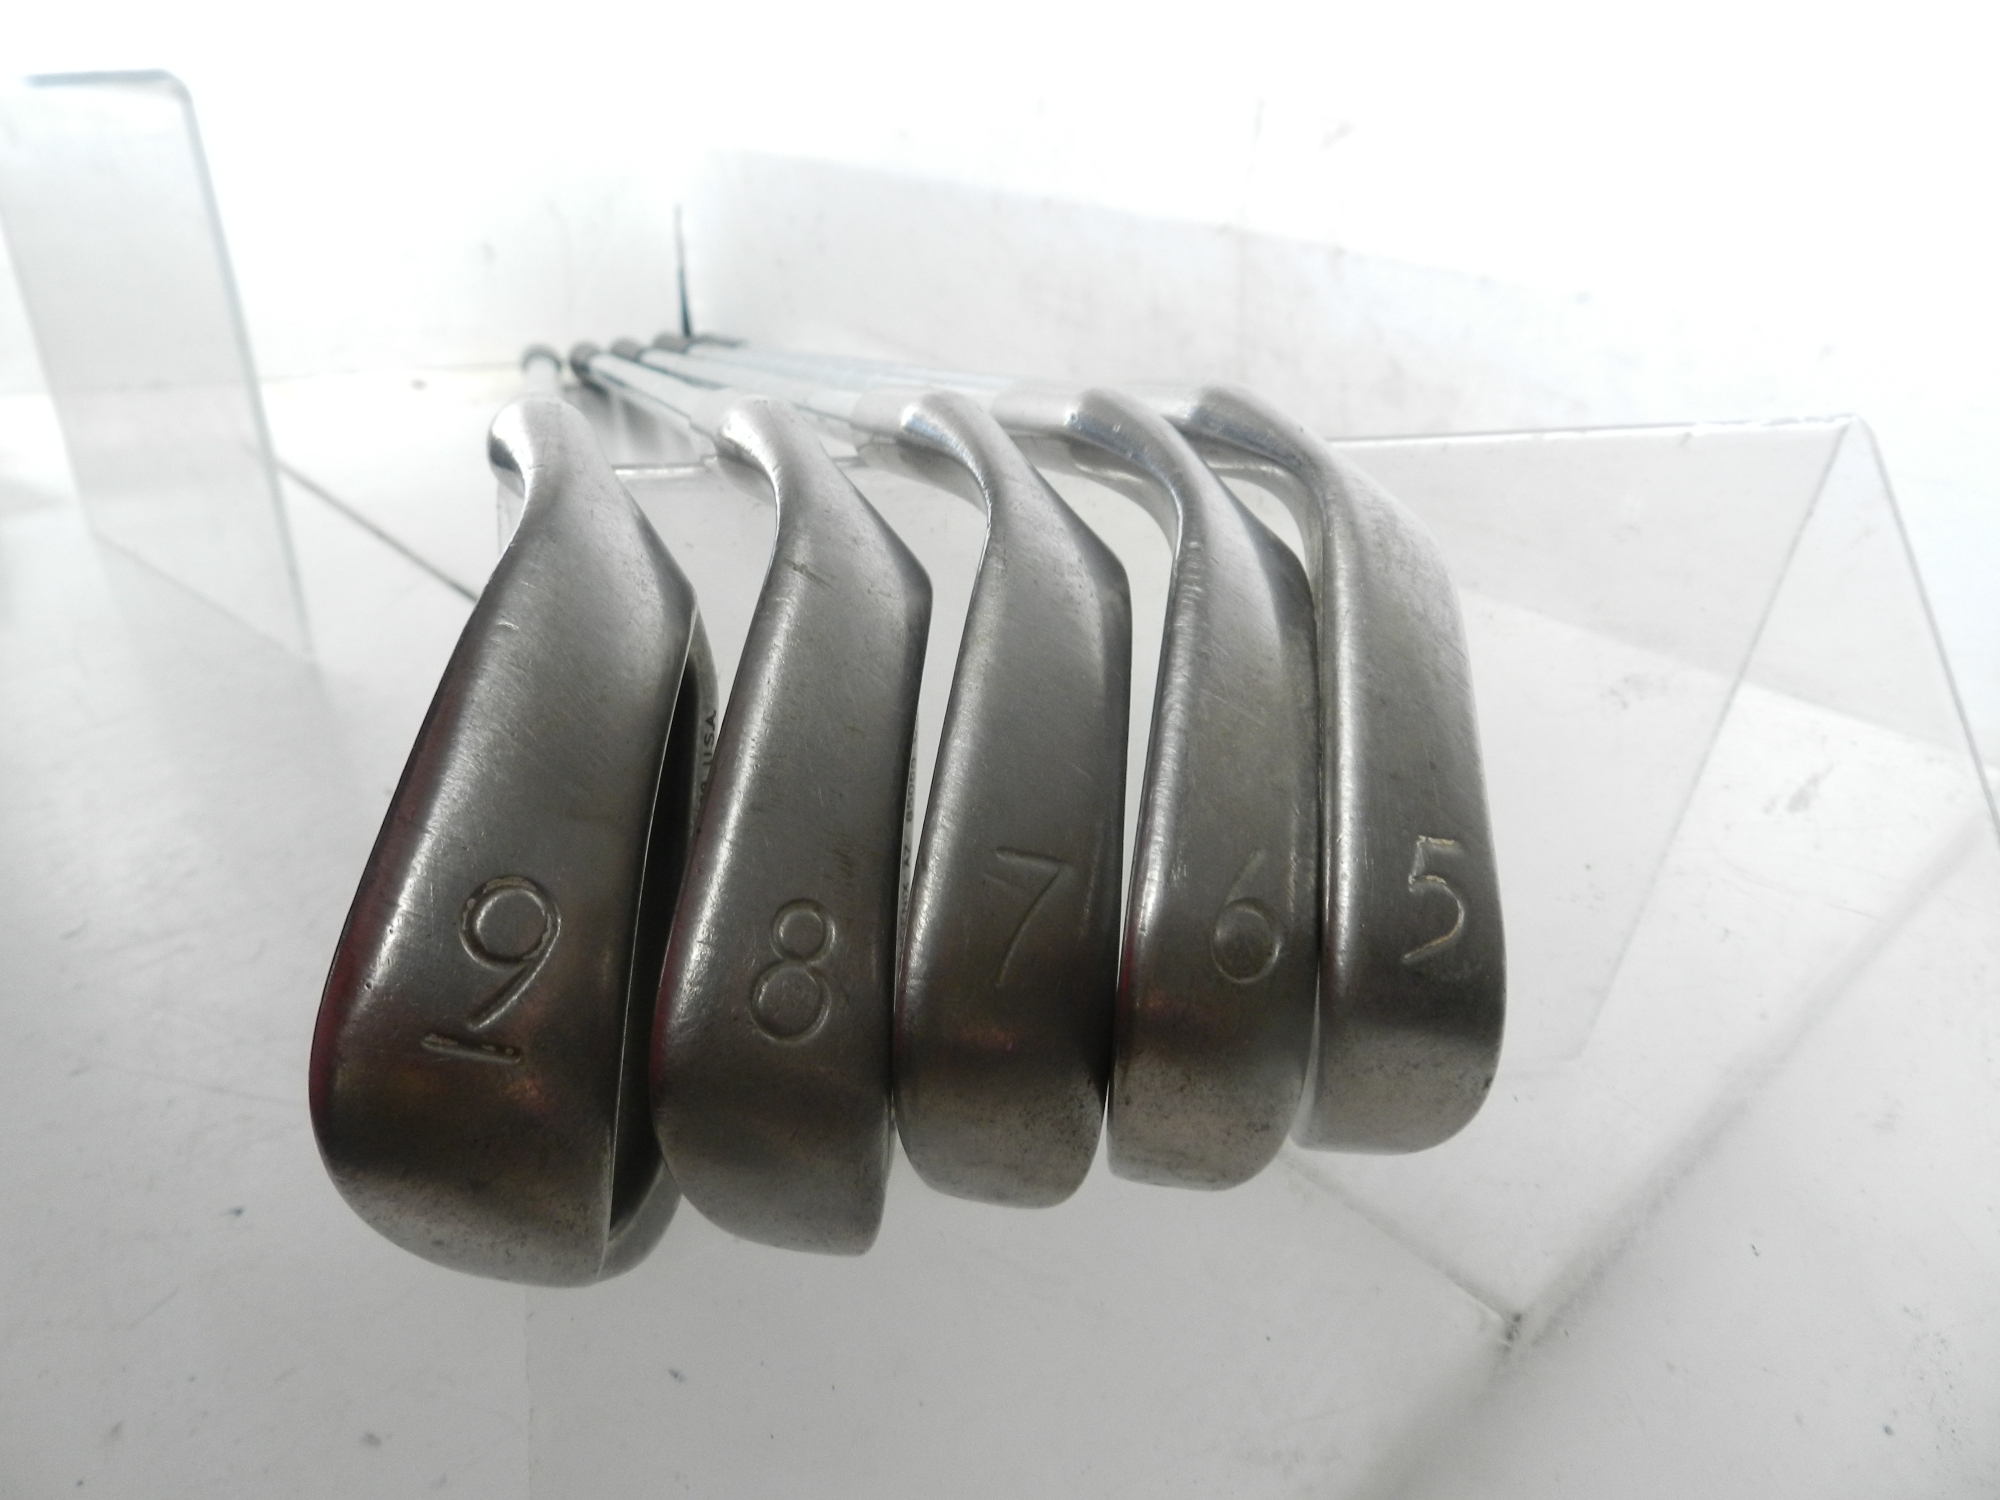 Ping Eye Golf 5 Club Iron Set 5-9 Red Dot with Steel Shafts